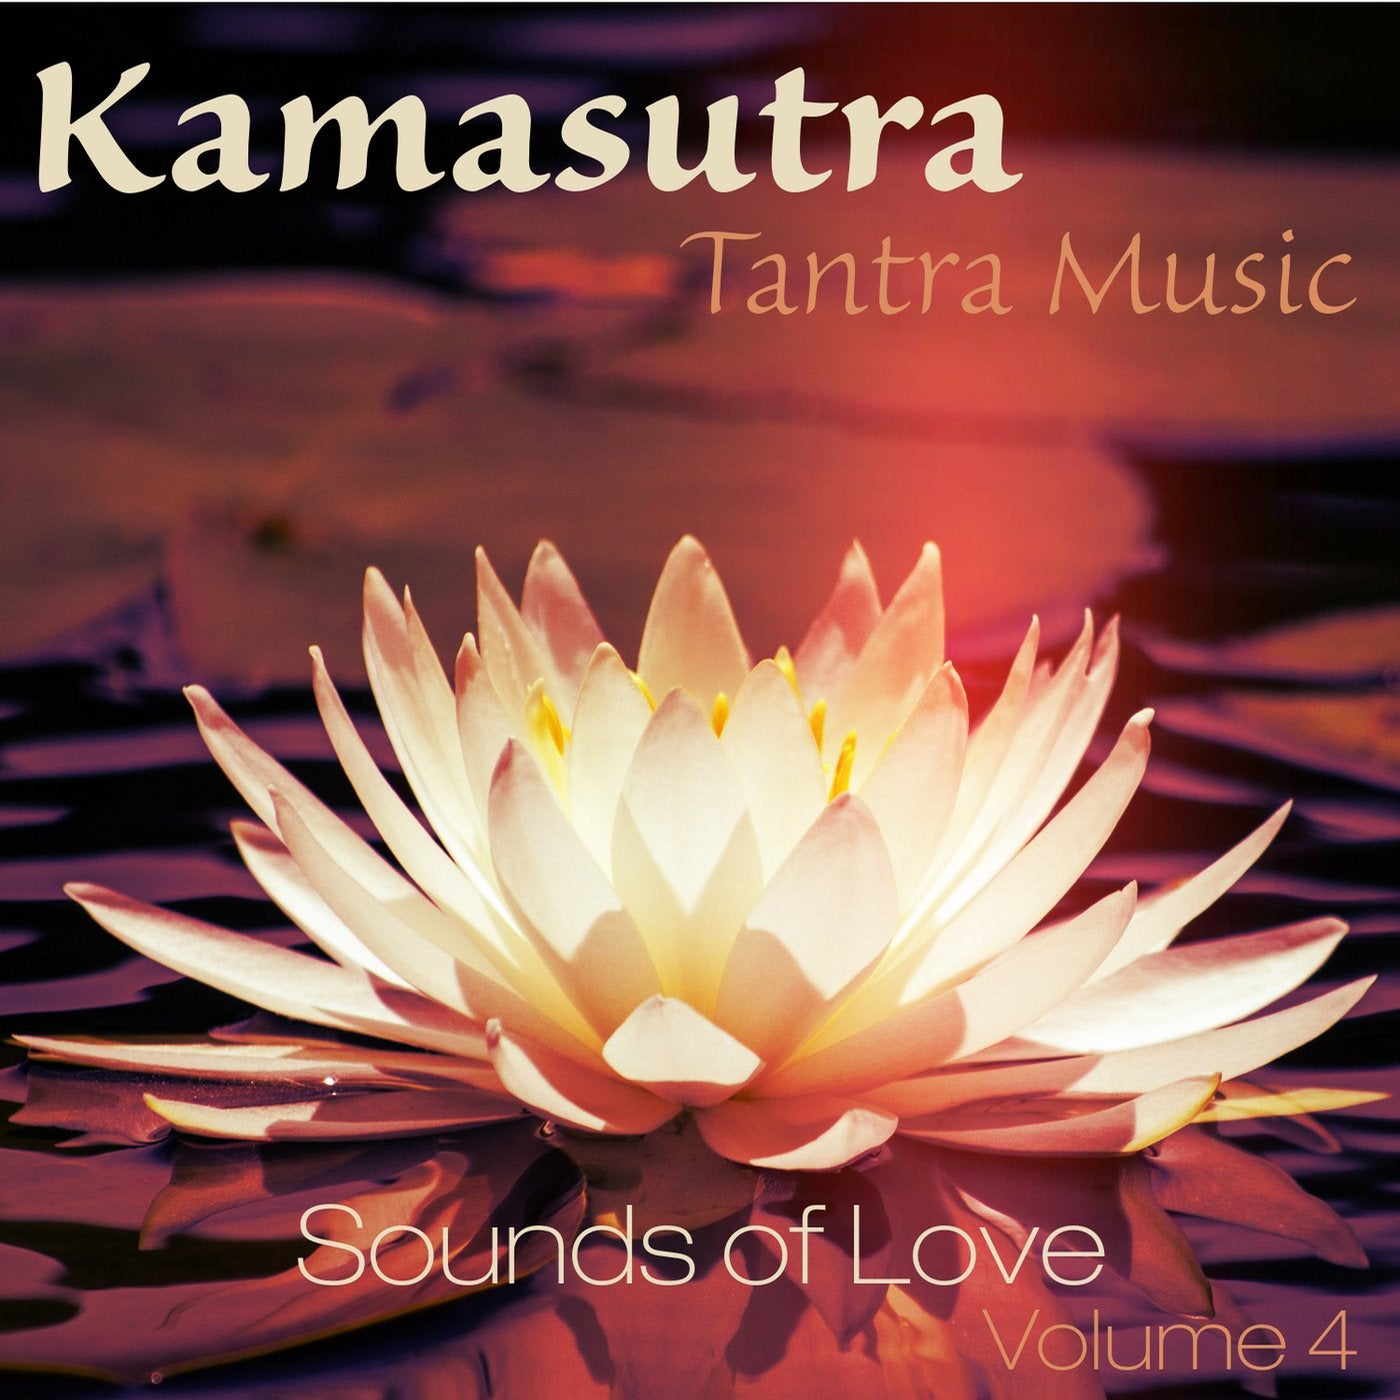 Kamasutra Tantra Music, Vol. 4: Sounds of Love